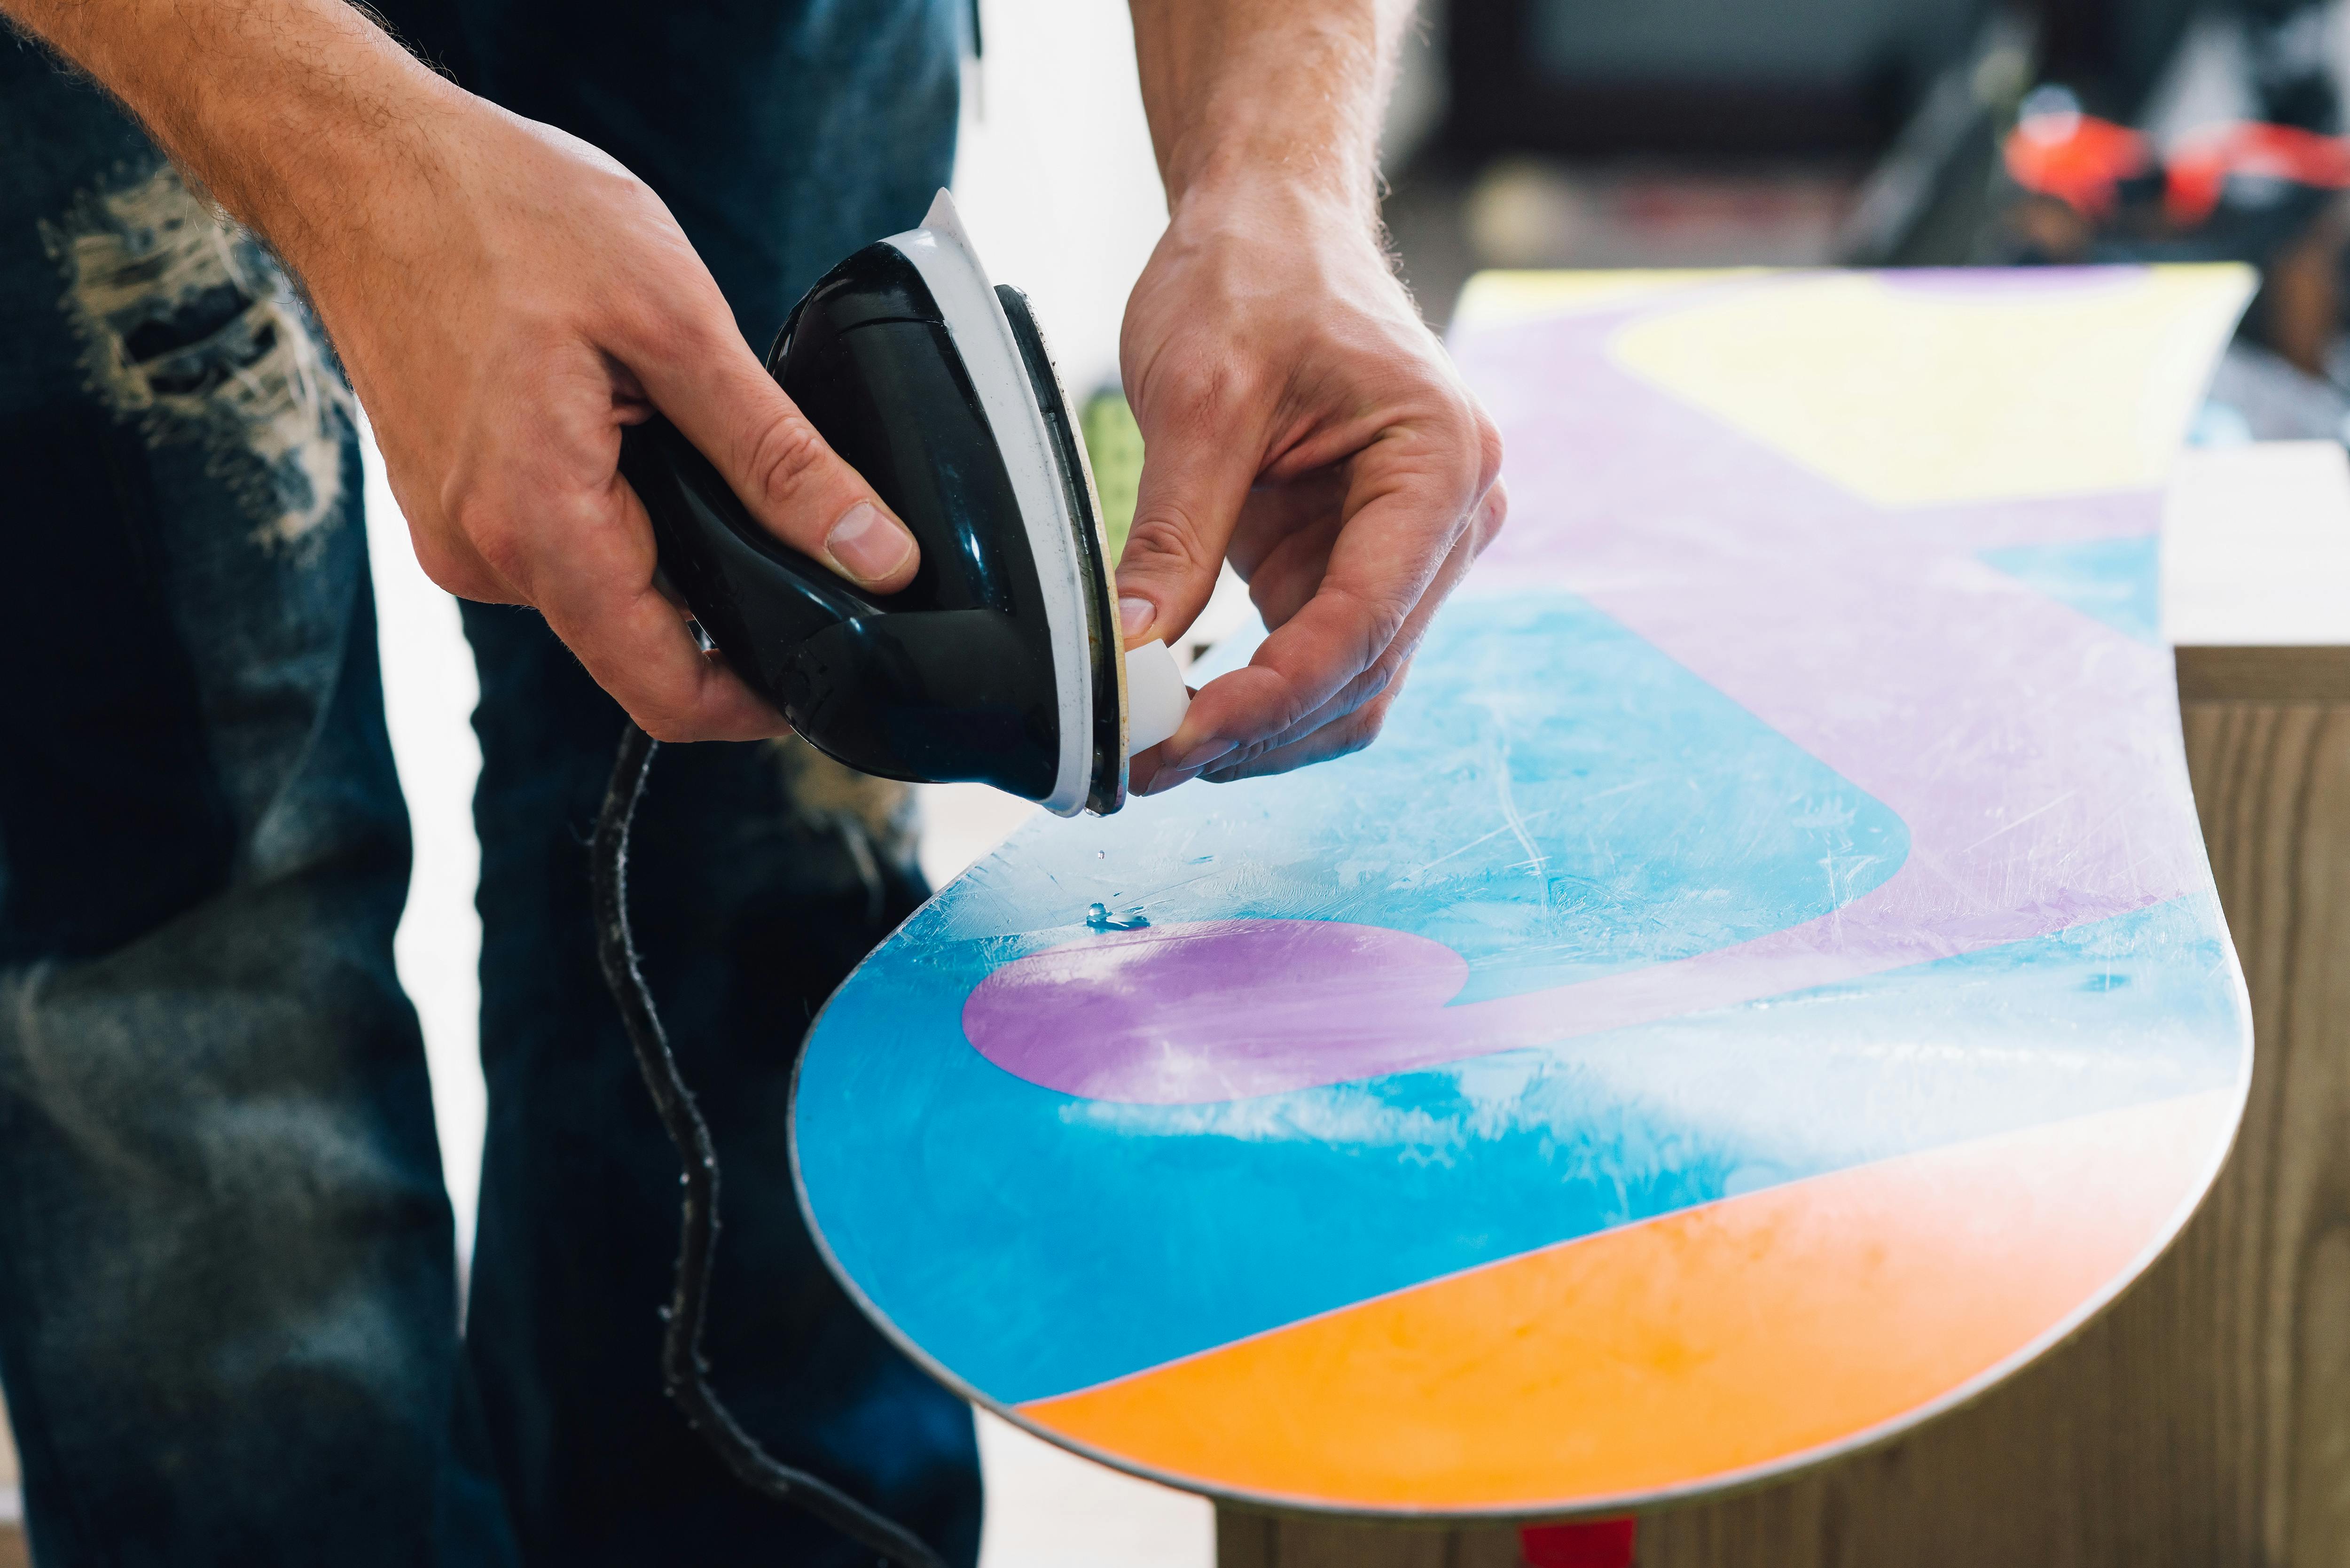 Do you need to wax a new snowboard?